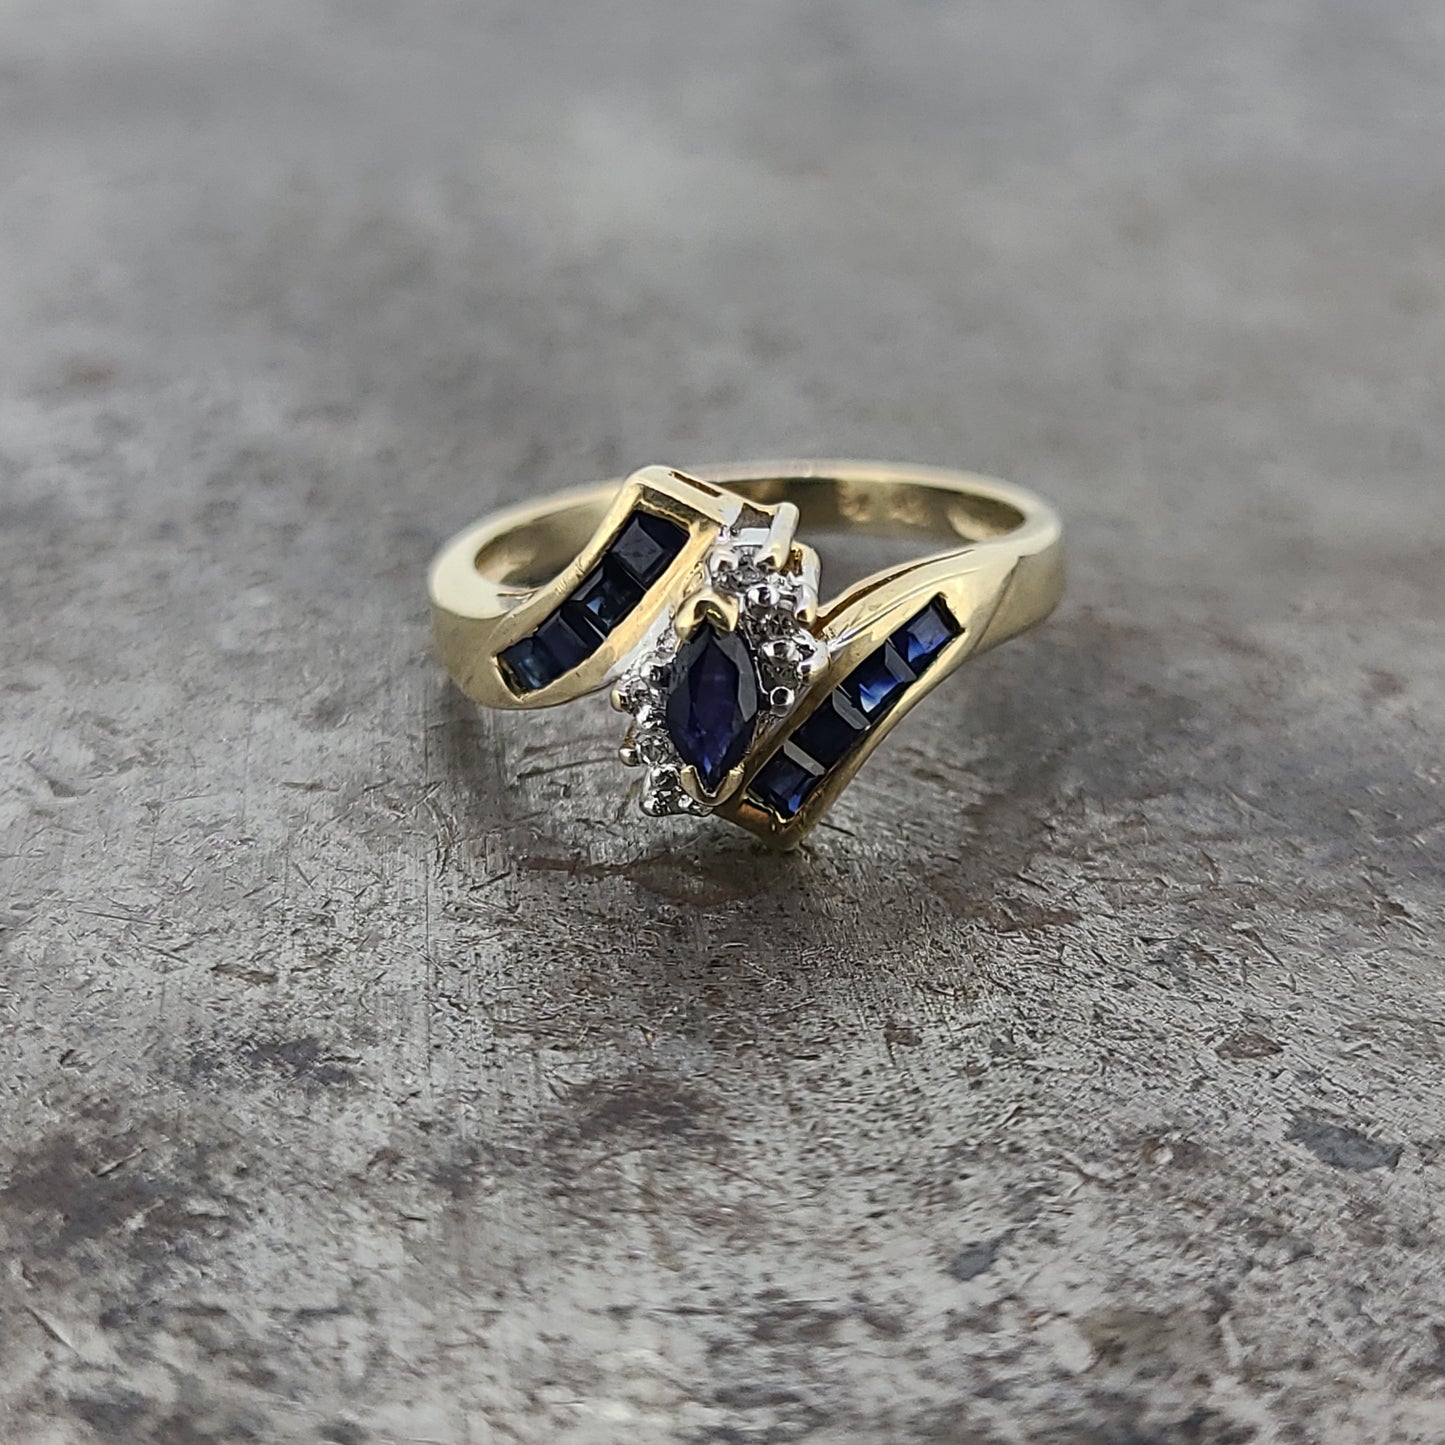 Synthetic Sapphire Ring